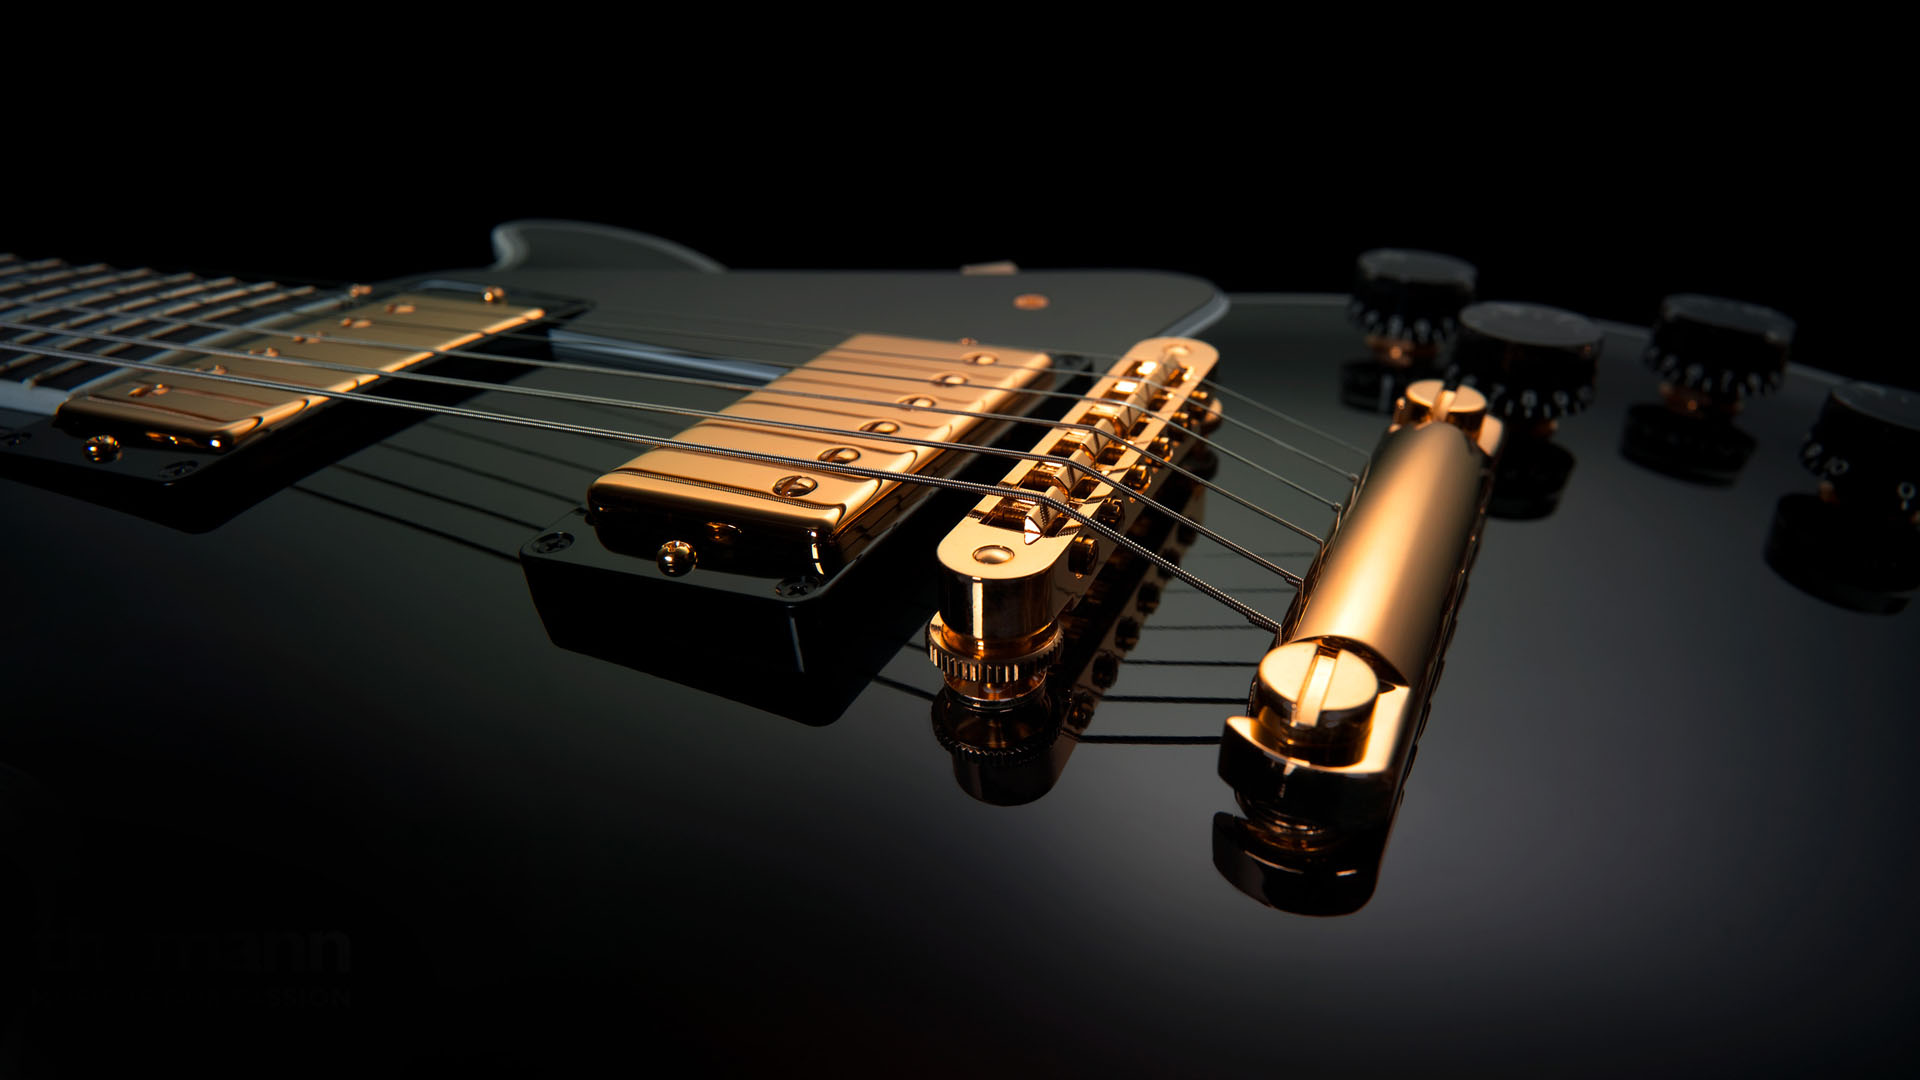 Gibson Guitar Wallpapers 7826 Hd Wallpapers in Music   Imagescicom